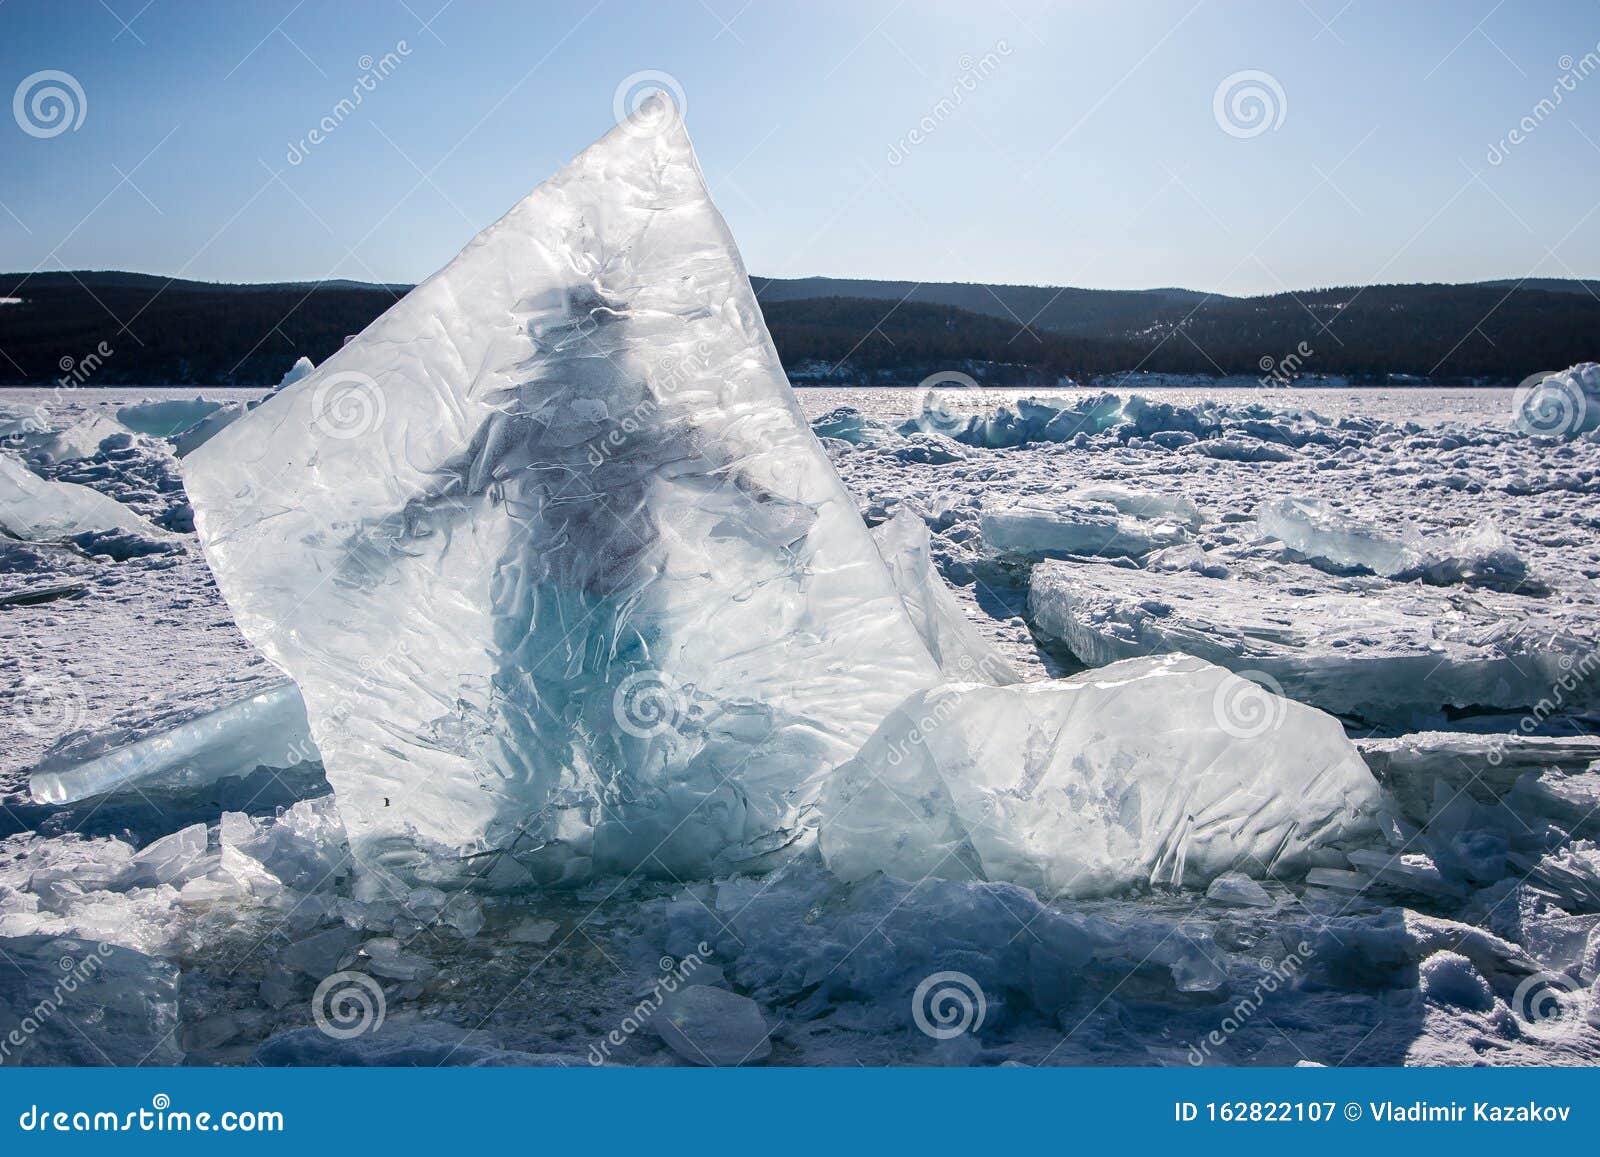 A Huge Ice Piece Frozen into Lake Baikal, Behind Which a Man Stands ...